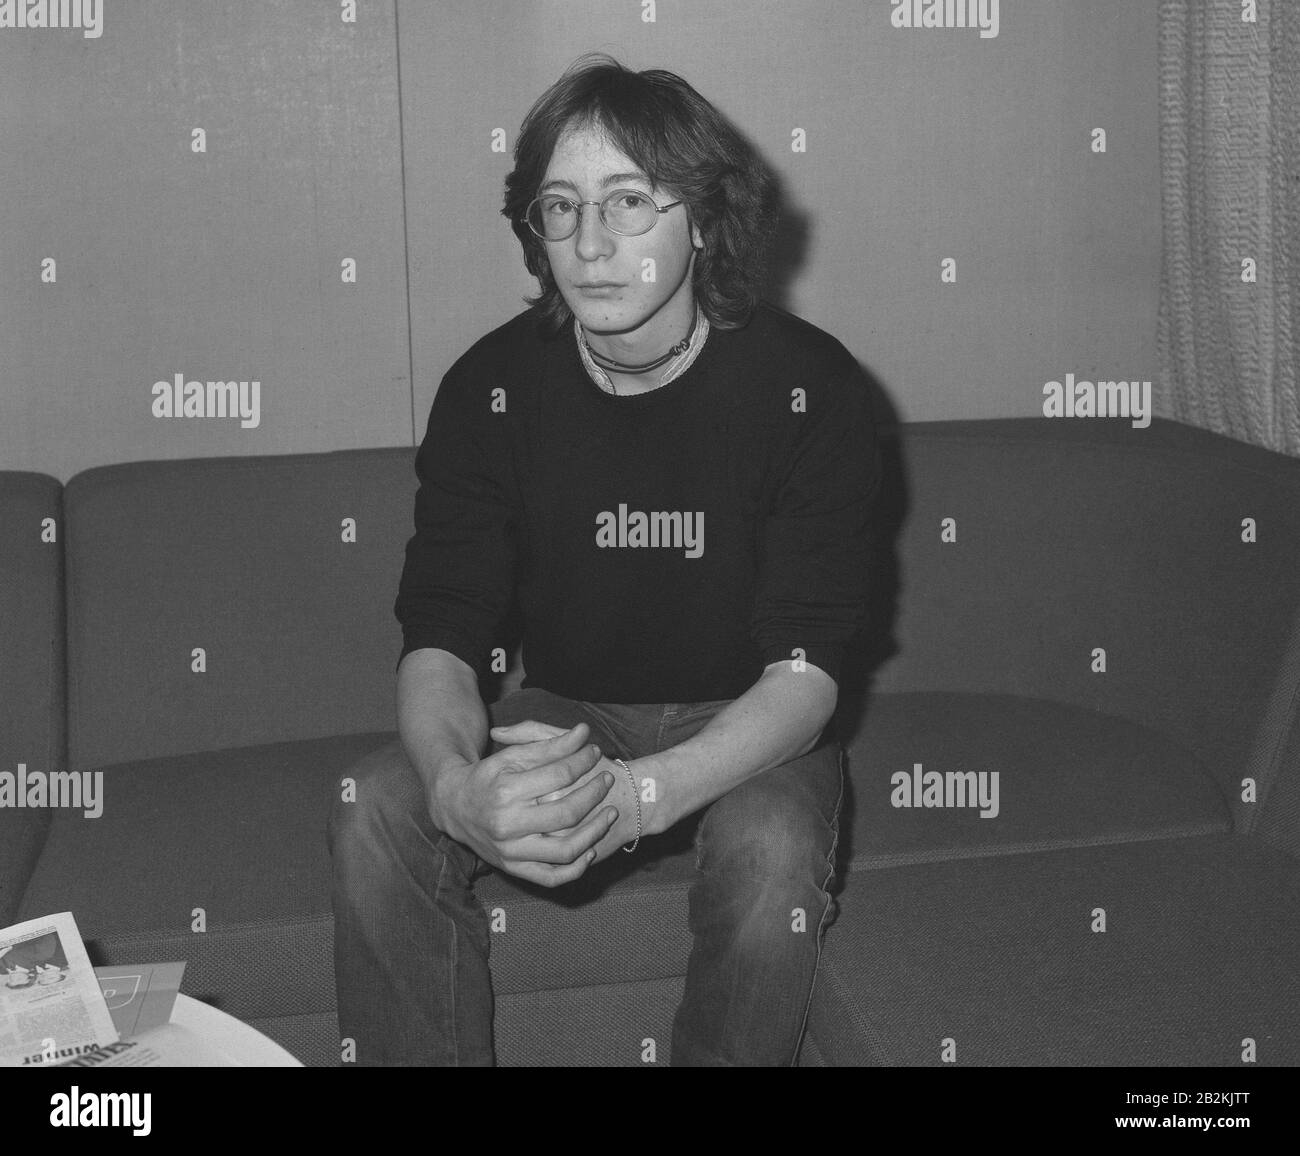 Julian Lennon High Resolution Stock Photography and Images - Alamy